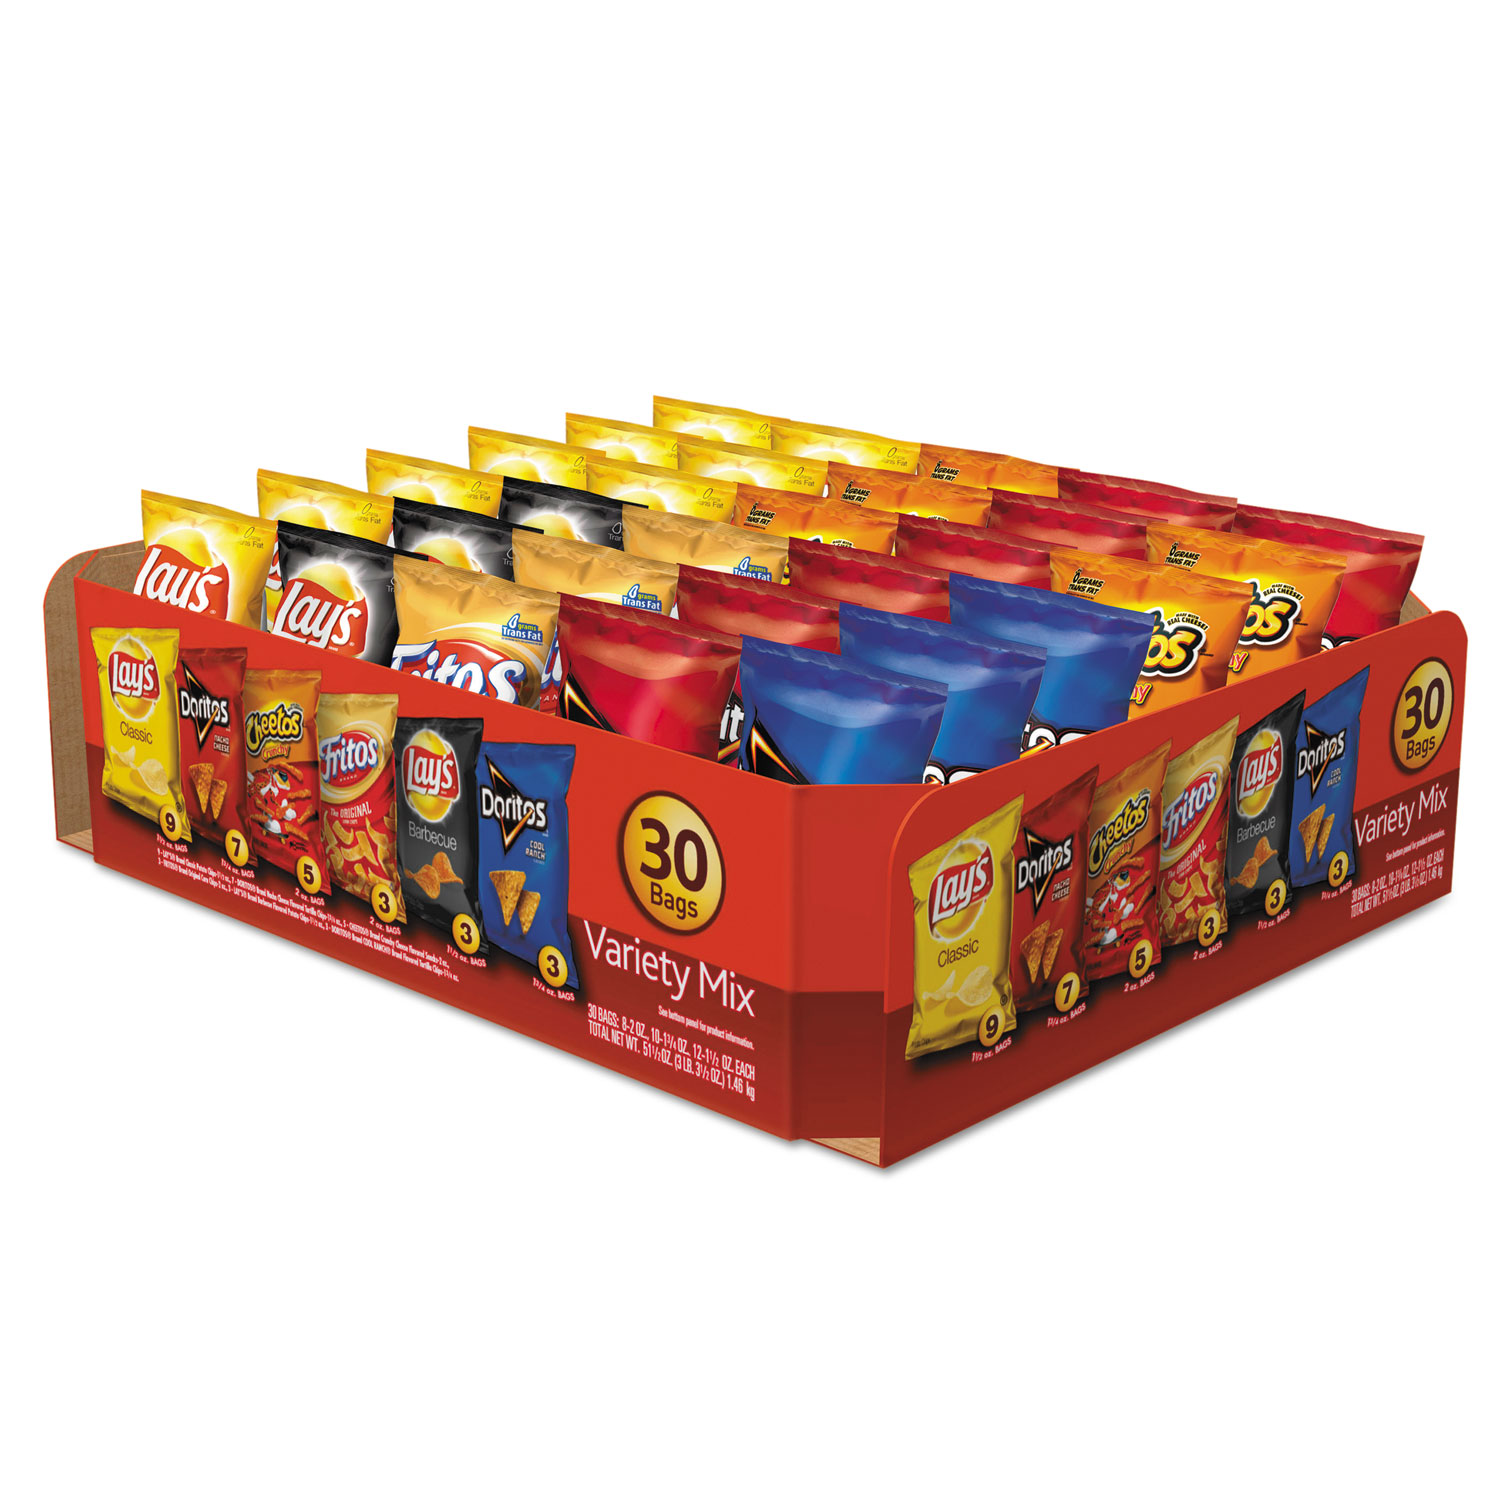  Frito-Lay 028400523479 Classic Variety Mix, Assorted, 30 Bags per Box (LAY52347) 